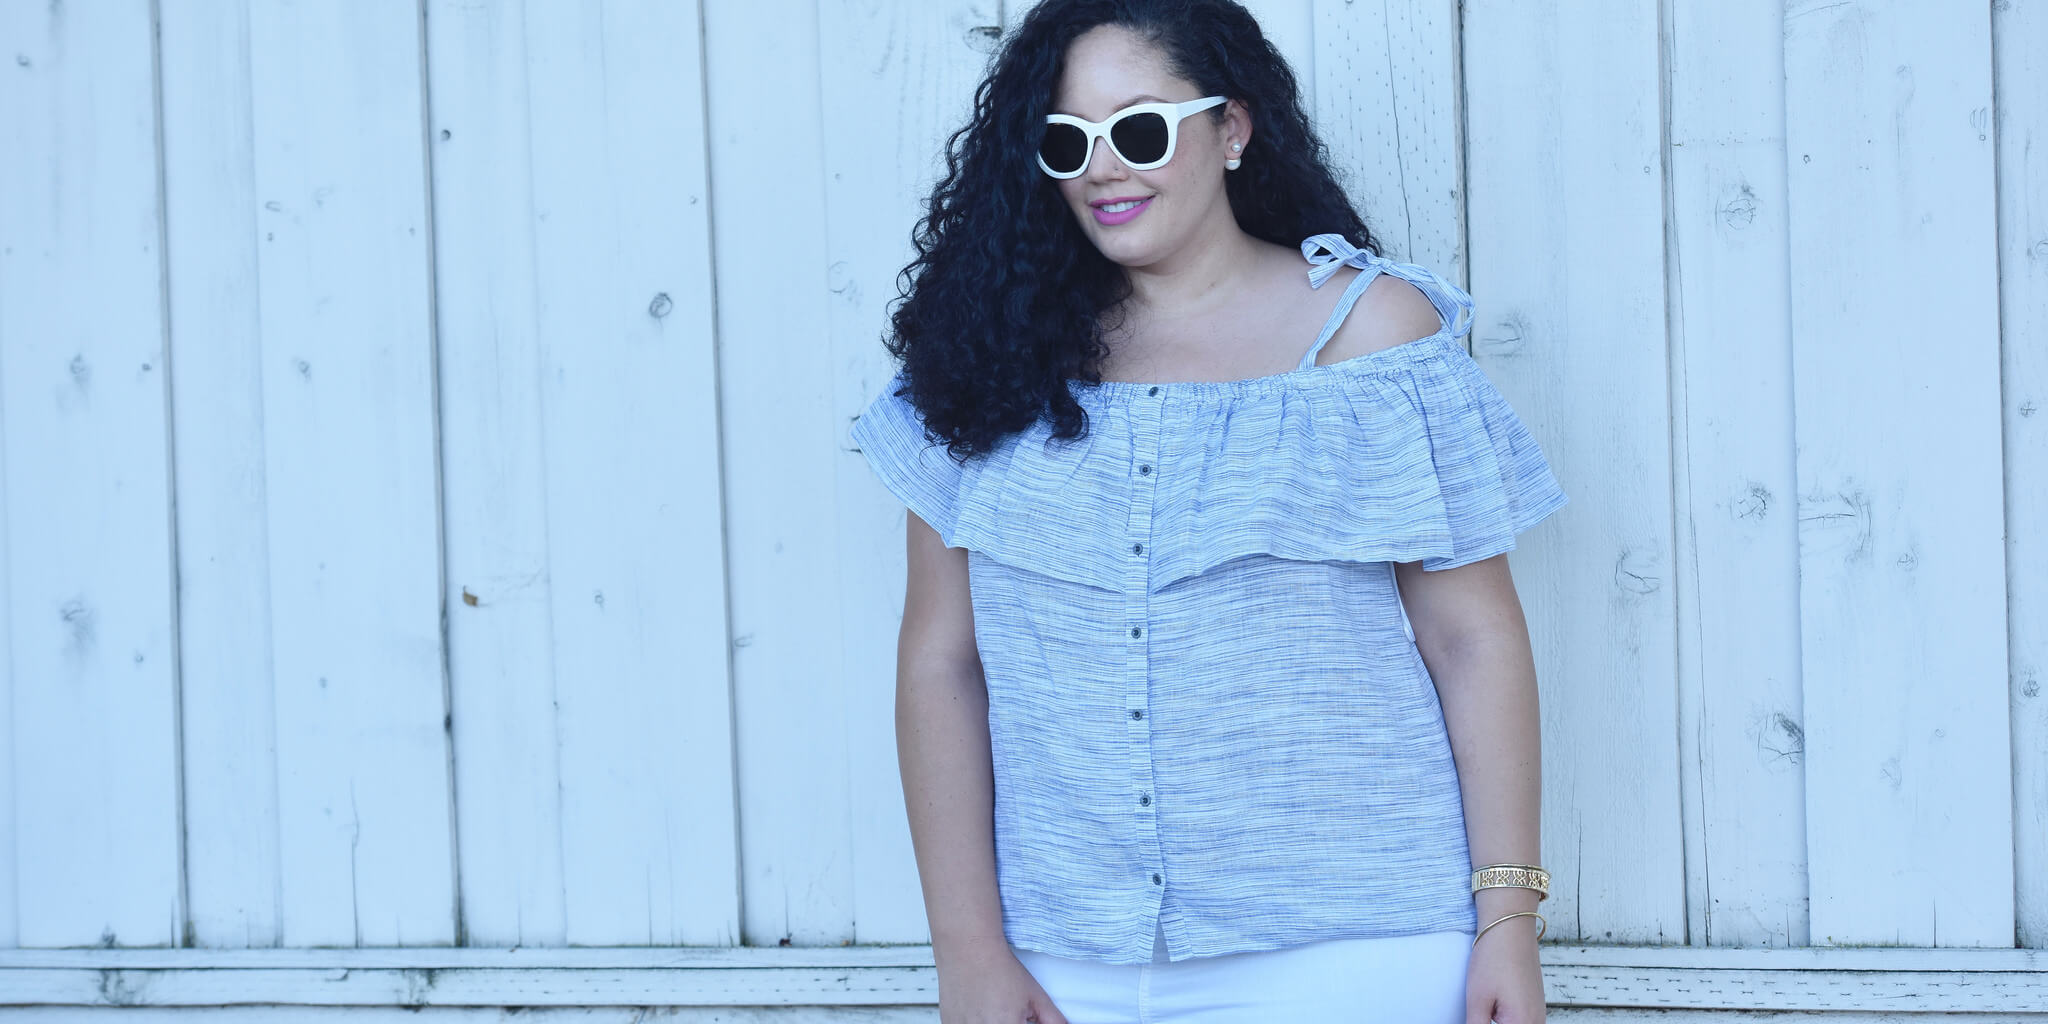 The Foolproof Way to Style White Jeans For Summer via @GirlWithCurves